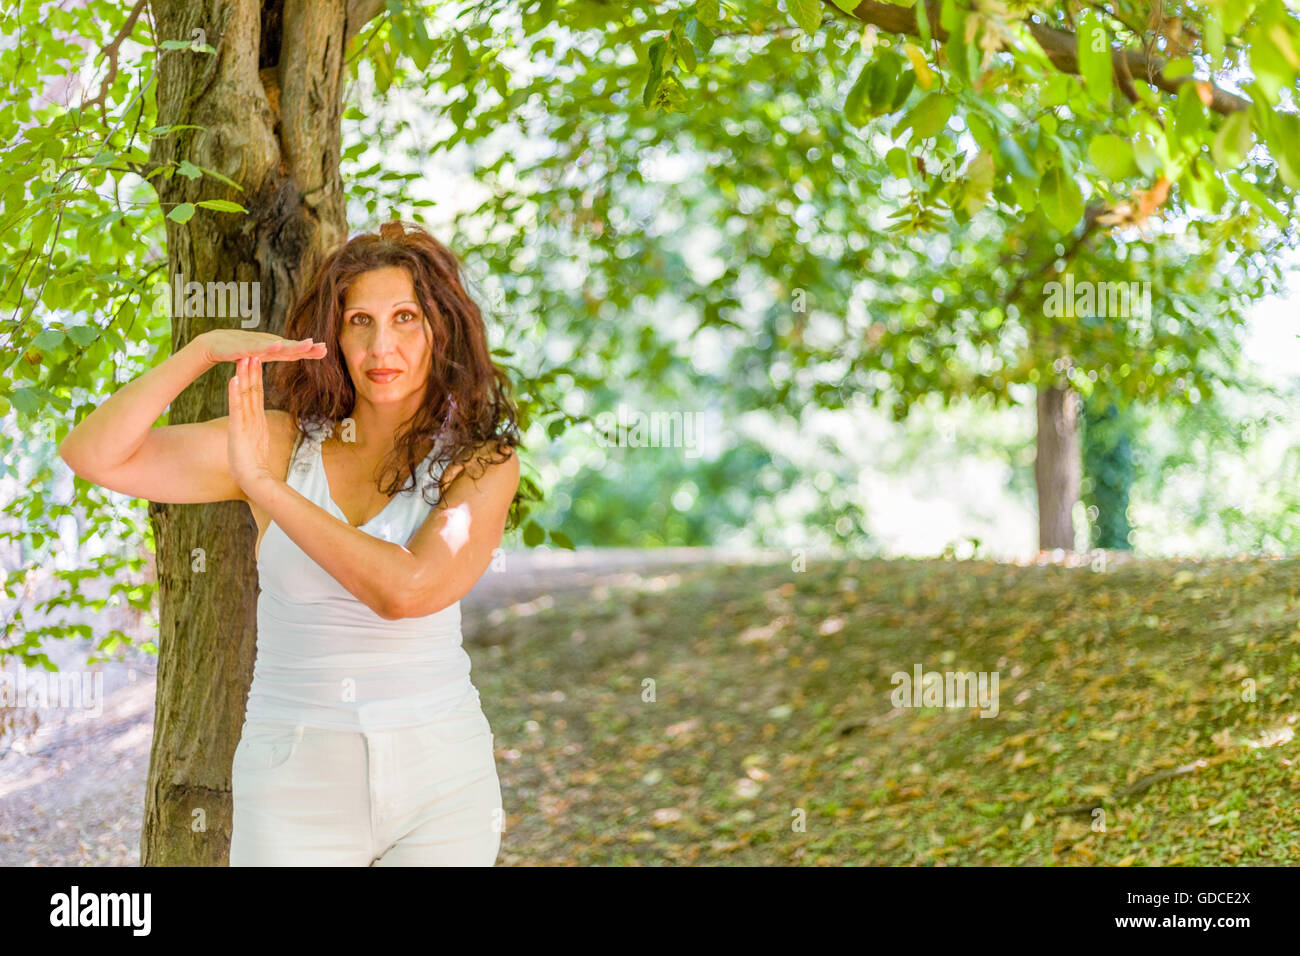 Buxom mature woman in white dress showing time out gesture, over green background Stock Photo